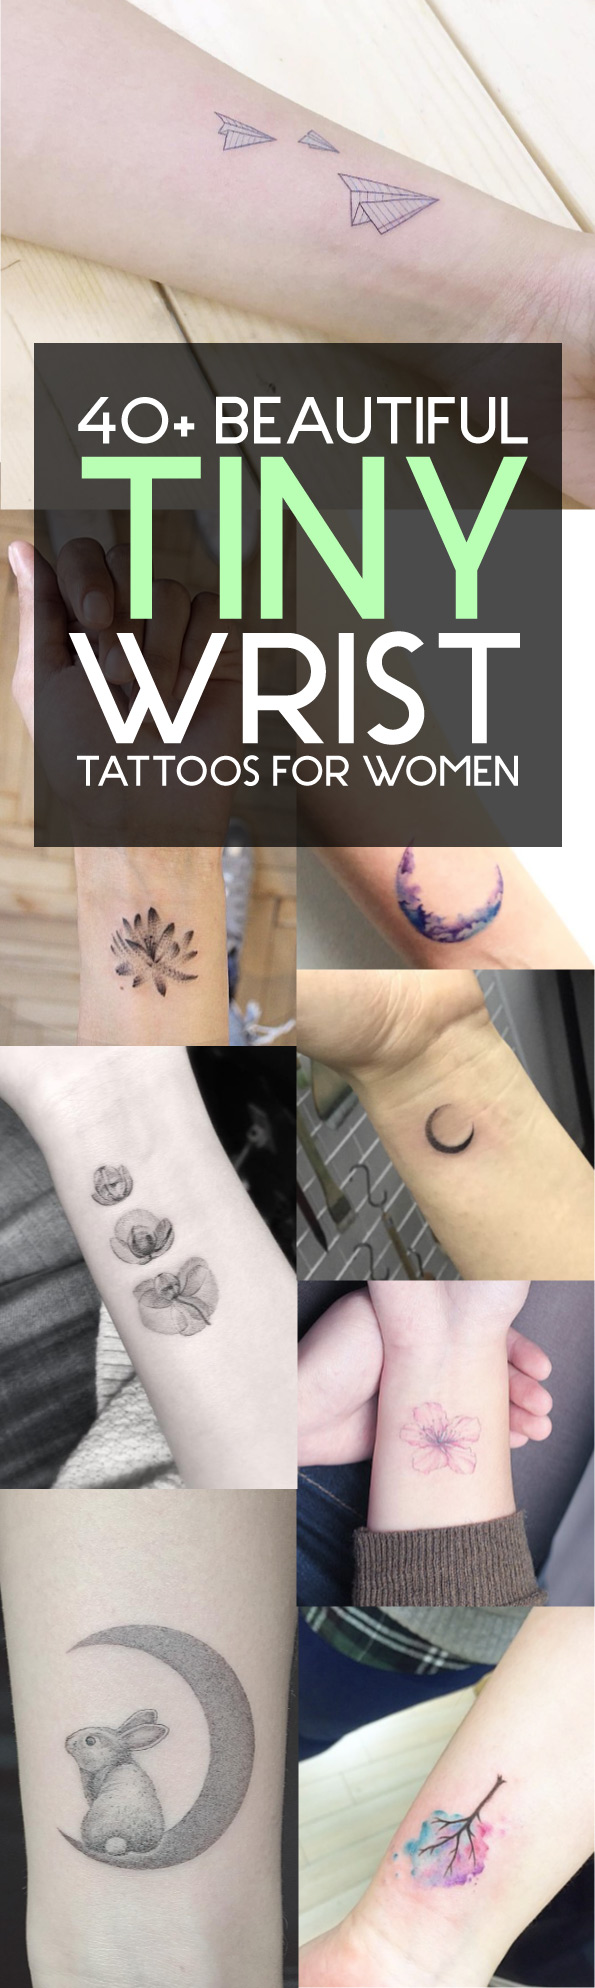 tribal wrist tattoos for women Archives - Tattoo Fonts For Women and Women-cheohanoi.vn